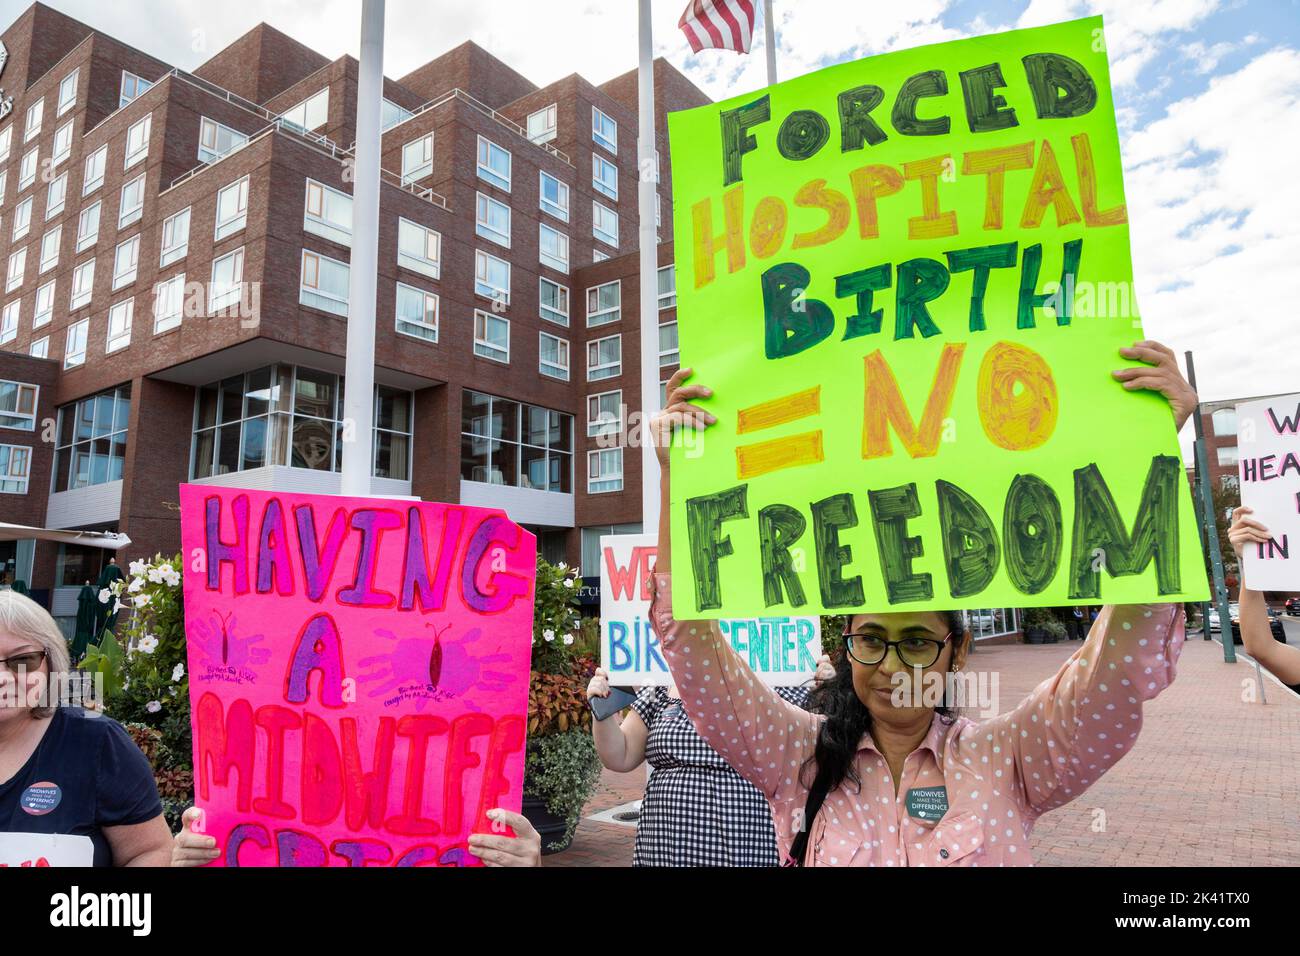 Sept. 28, 2022. Cambridge, MA. Community activists, union organizers and maternal health advocates rallied and marched at Beth Israel Lahey Health Cor Stock Photo